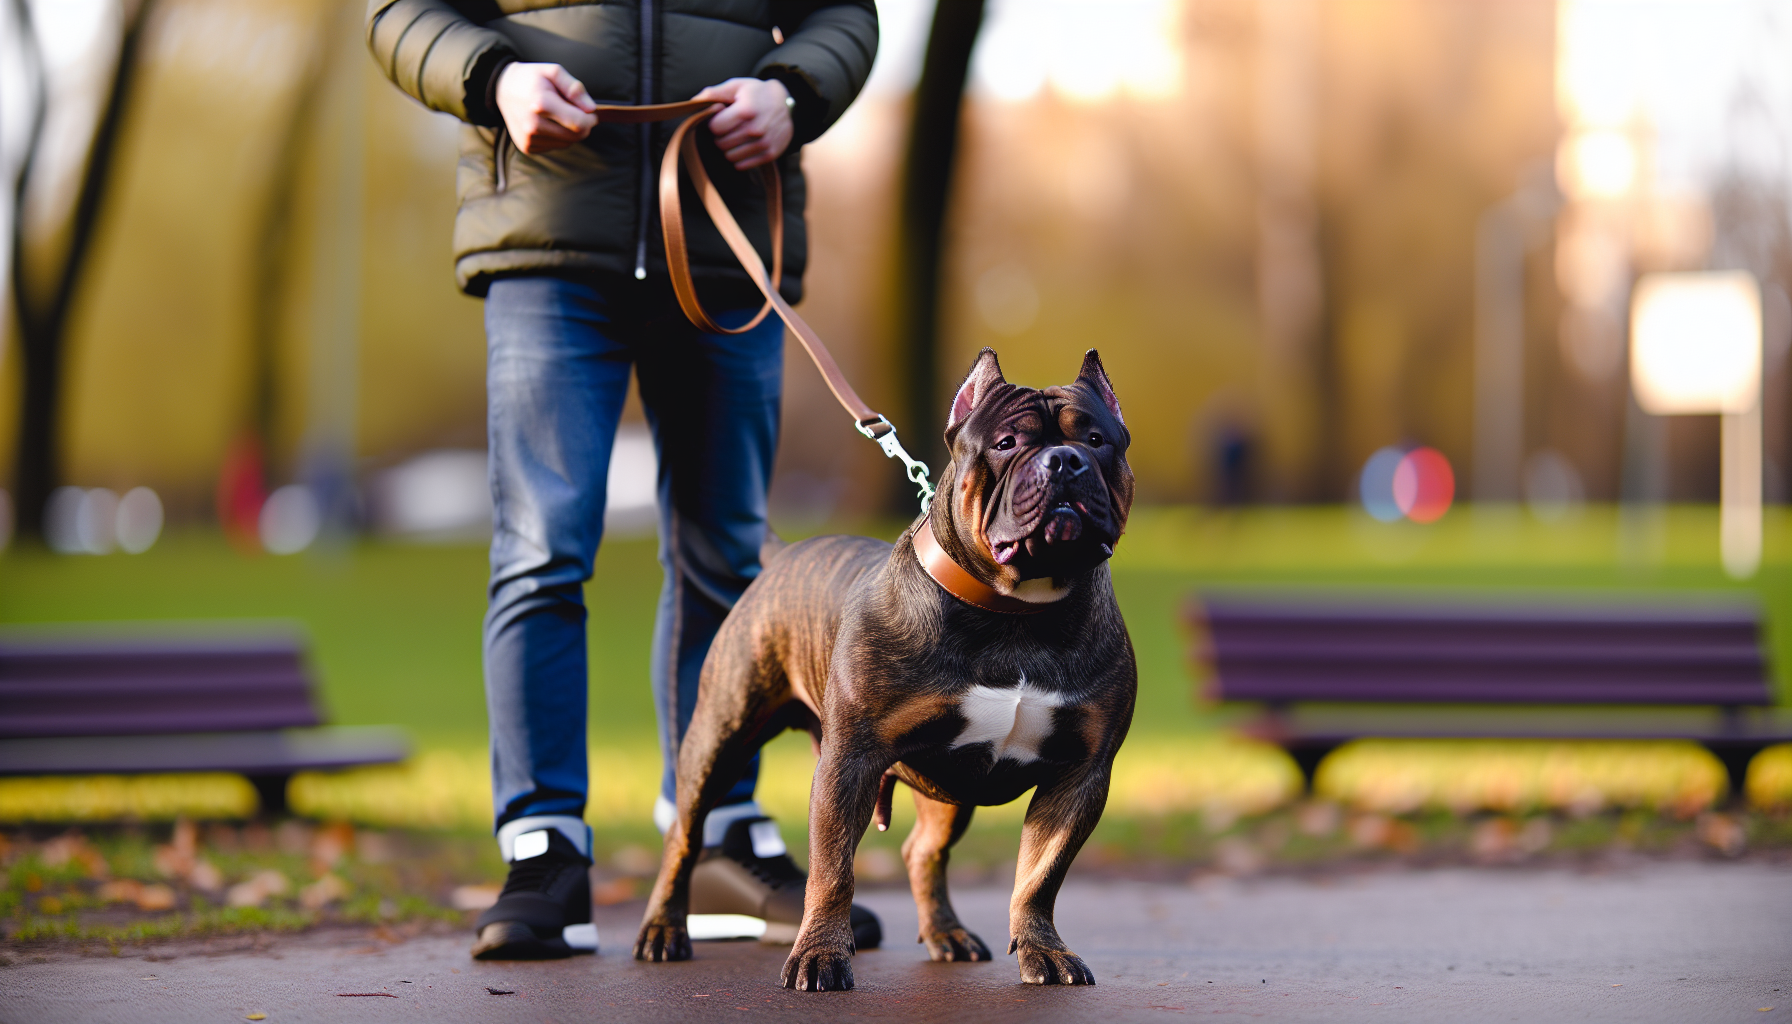 An XL Bully dog wearing a muzzle in a public place